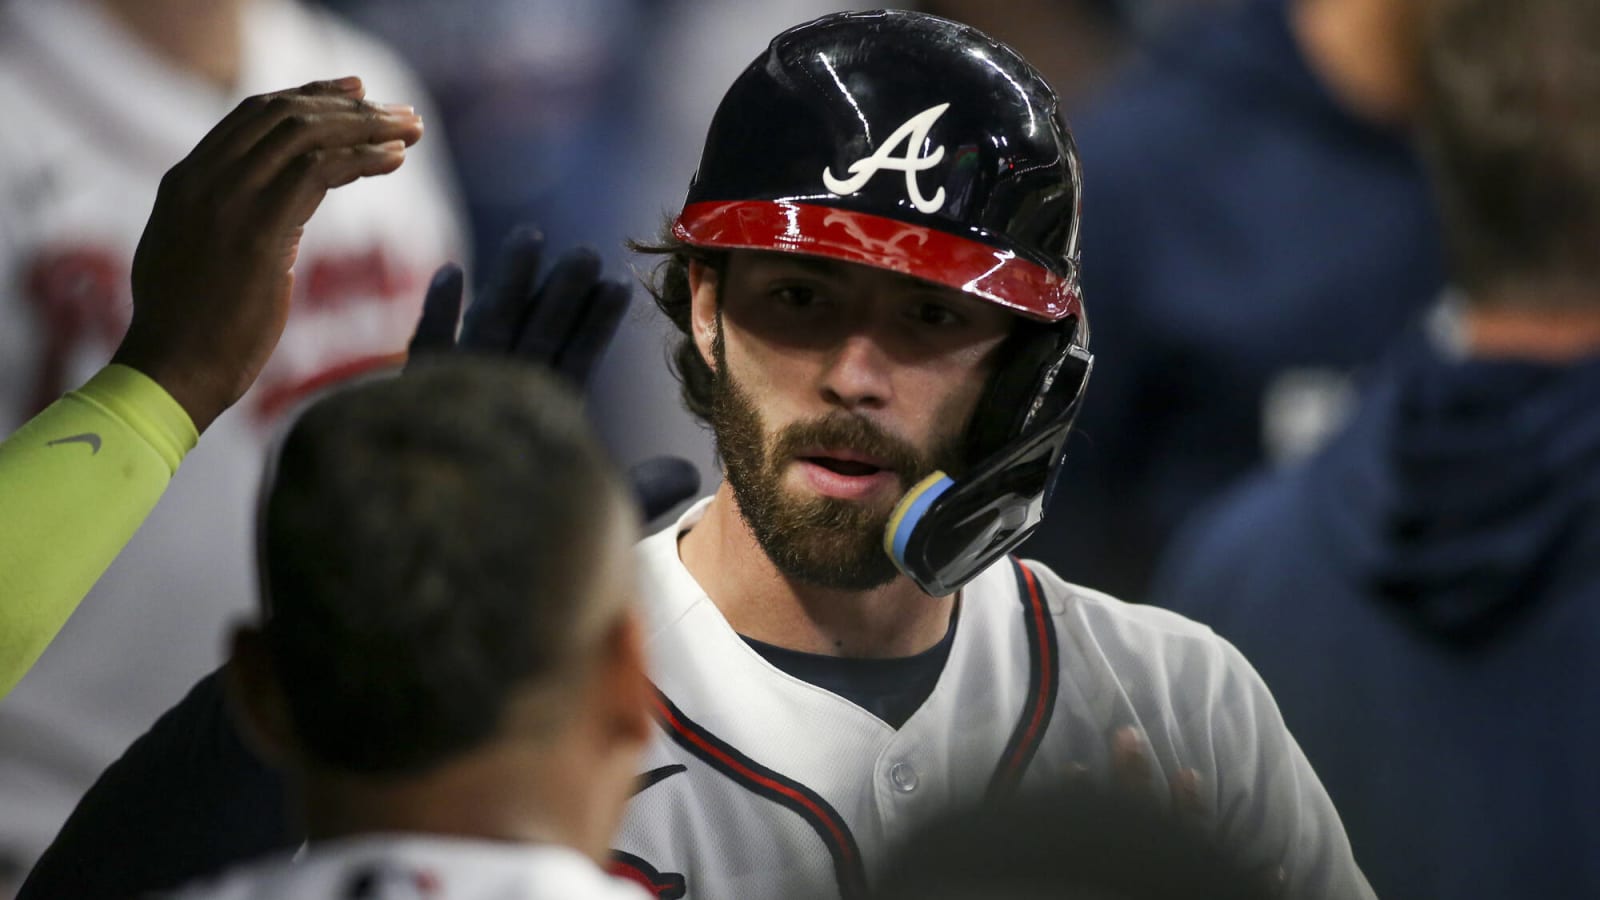 ESPN predicts Dansby Swanson’s next contract